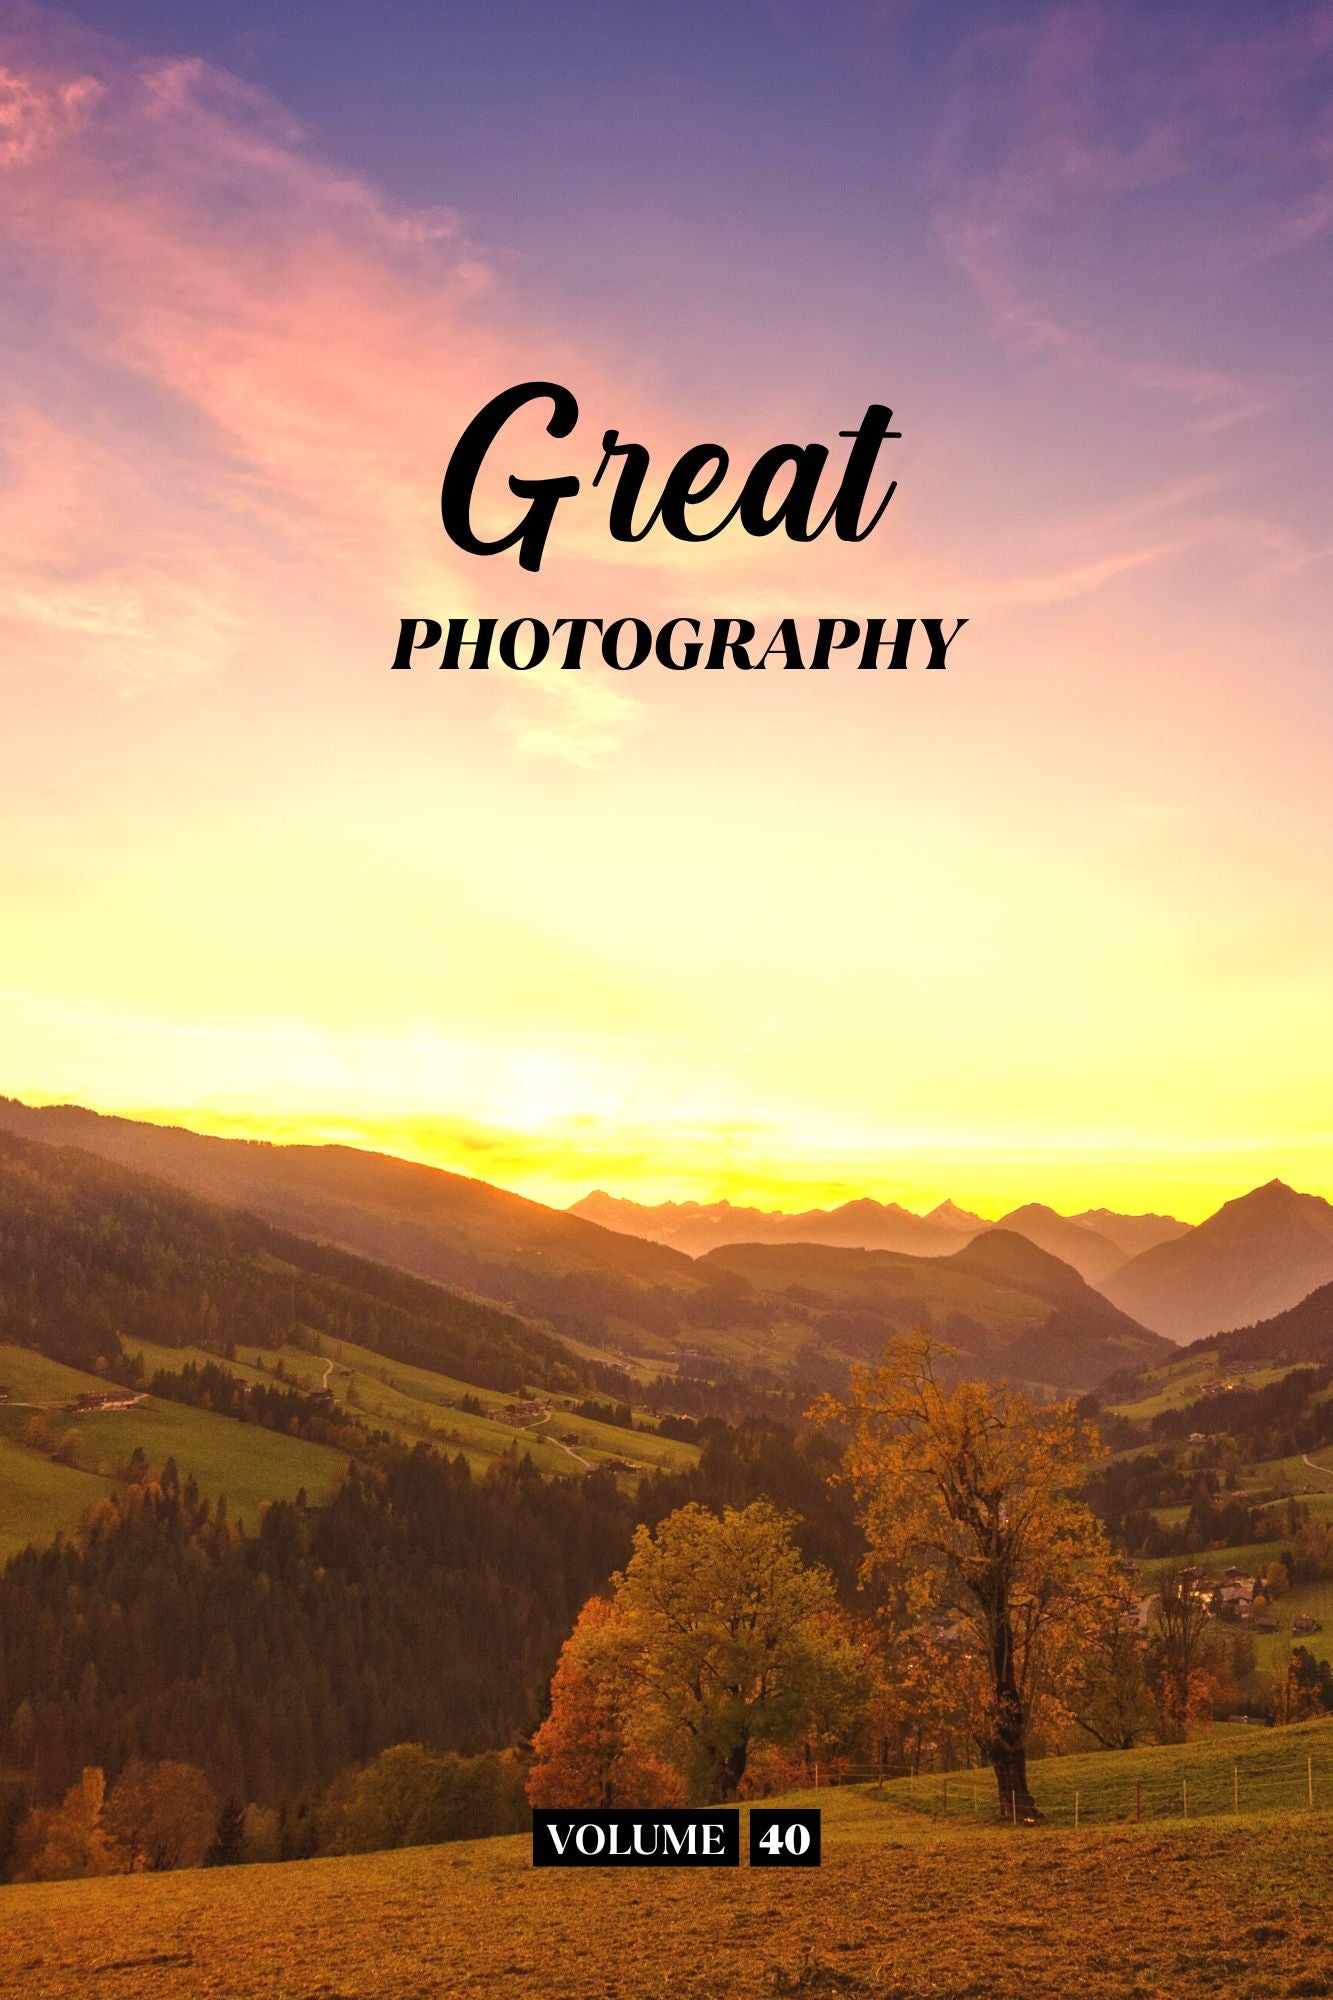 Great Photography Volume 40 (Physical Book Pre-Order)